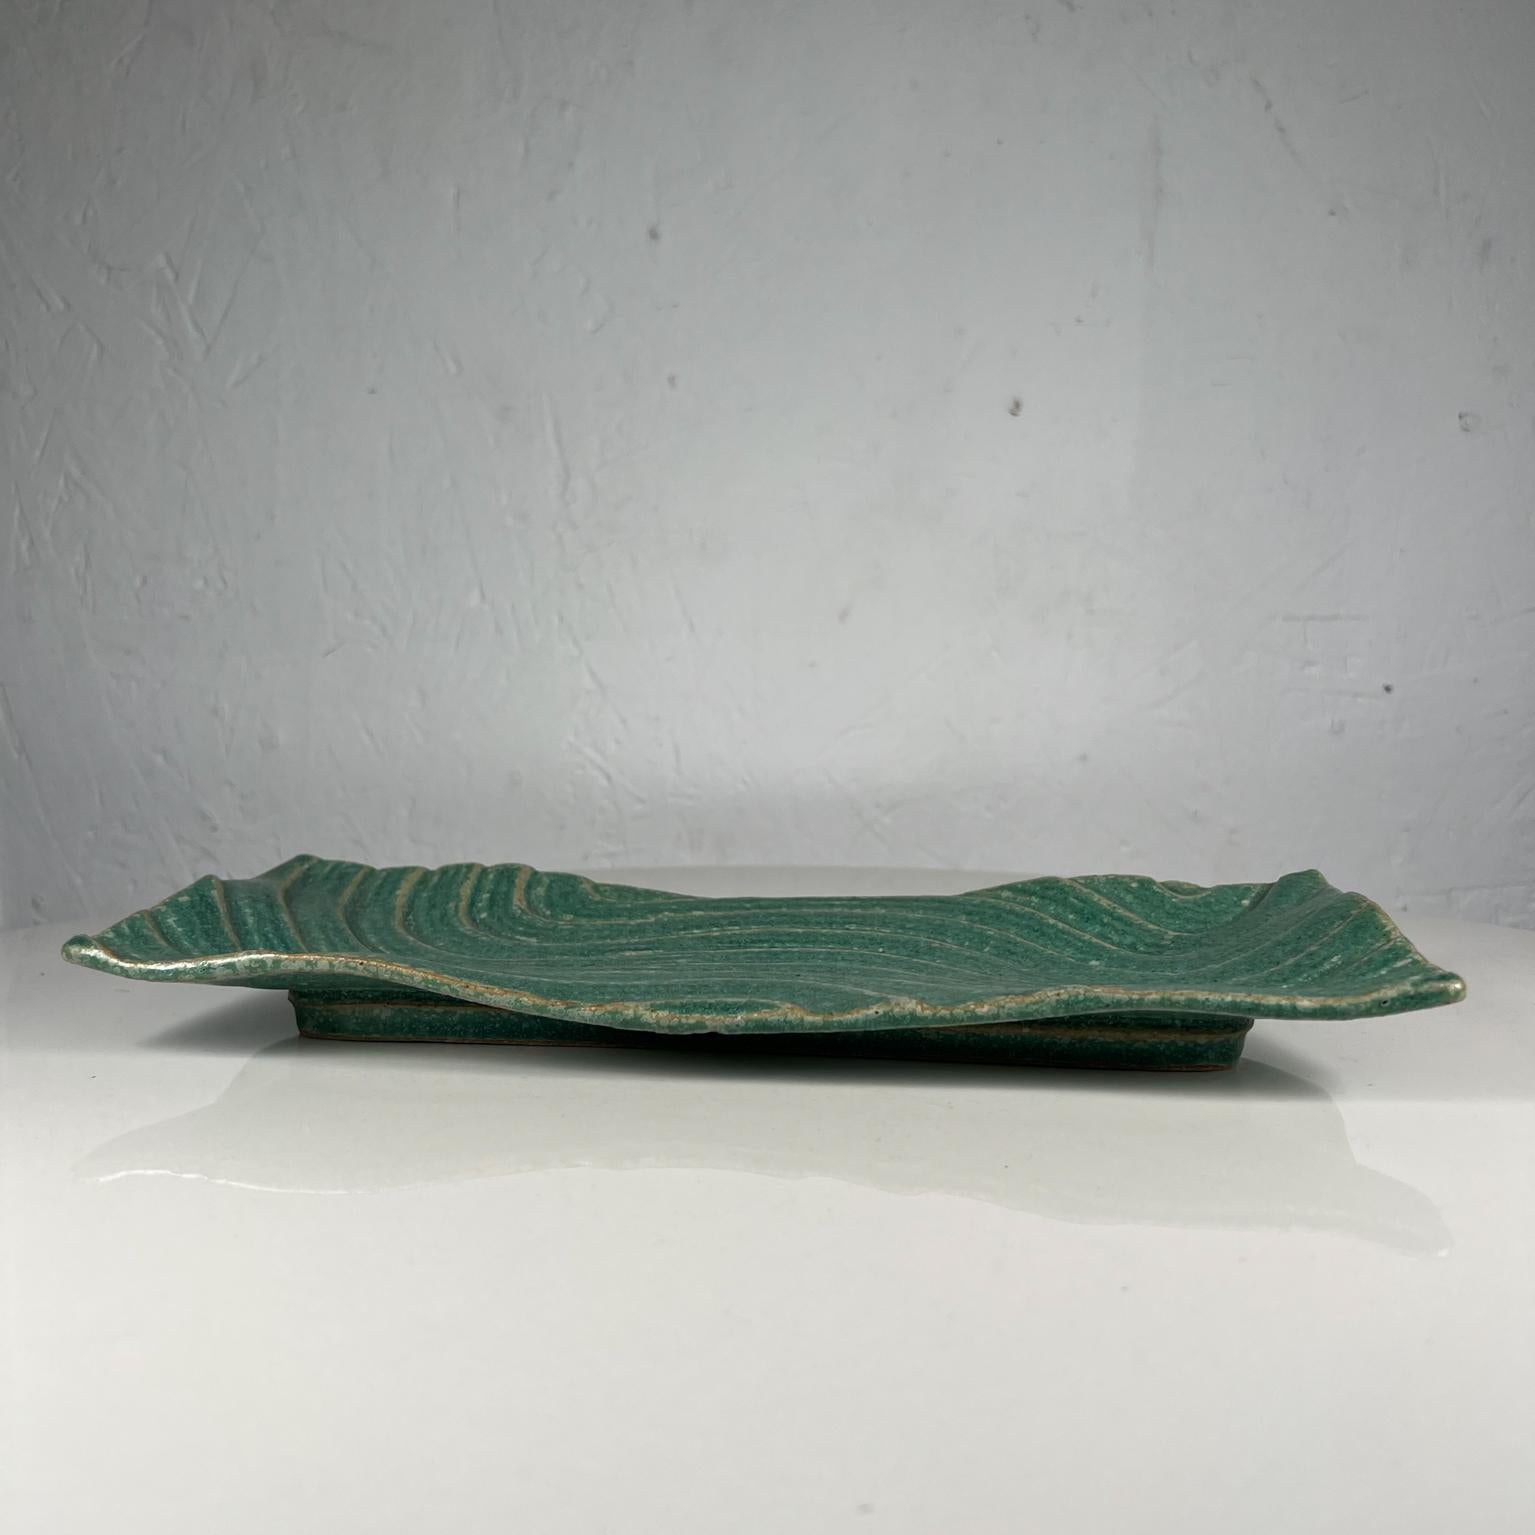 1970s Sculptural Green Wave Dish Studio Pottery Art Ed Thompson For Sale 5